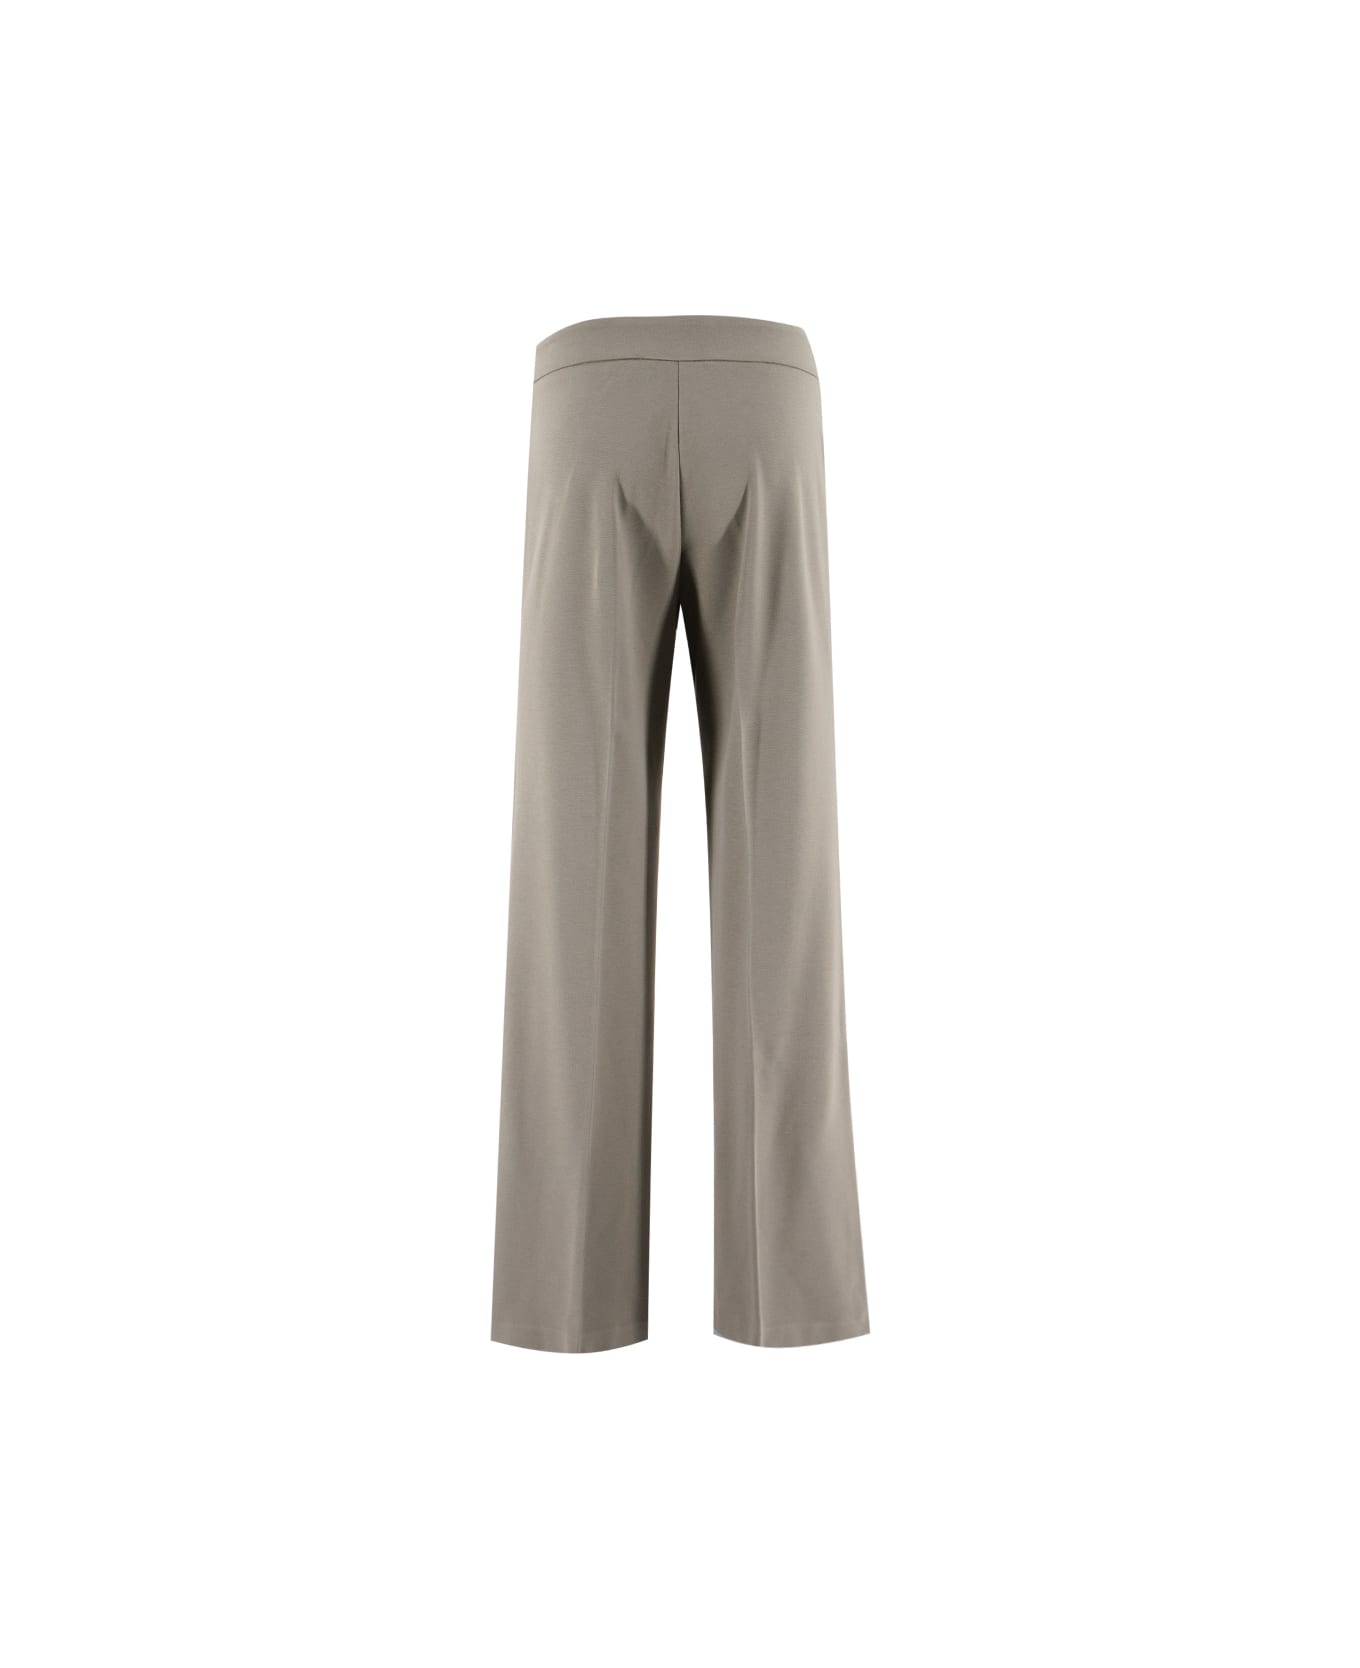 Le Tricot Perugia Trousers - MIDDLE GREY ボトムス